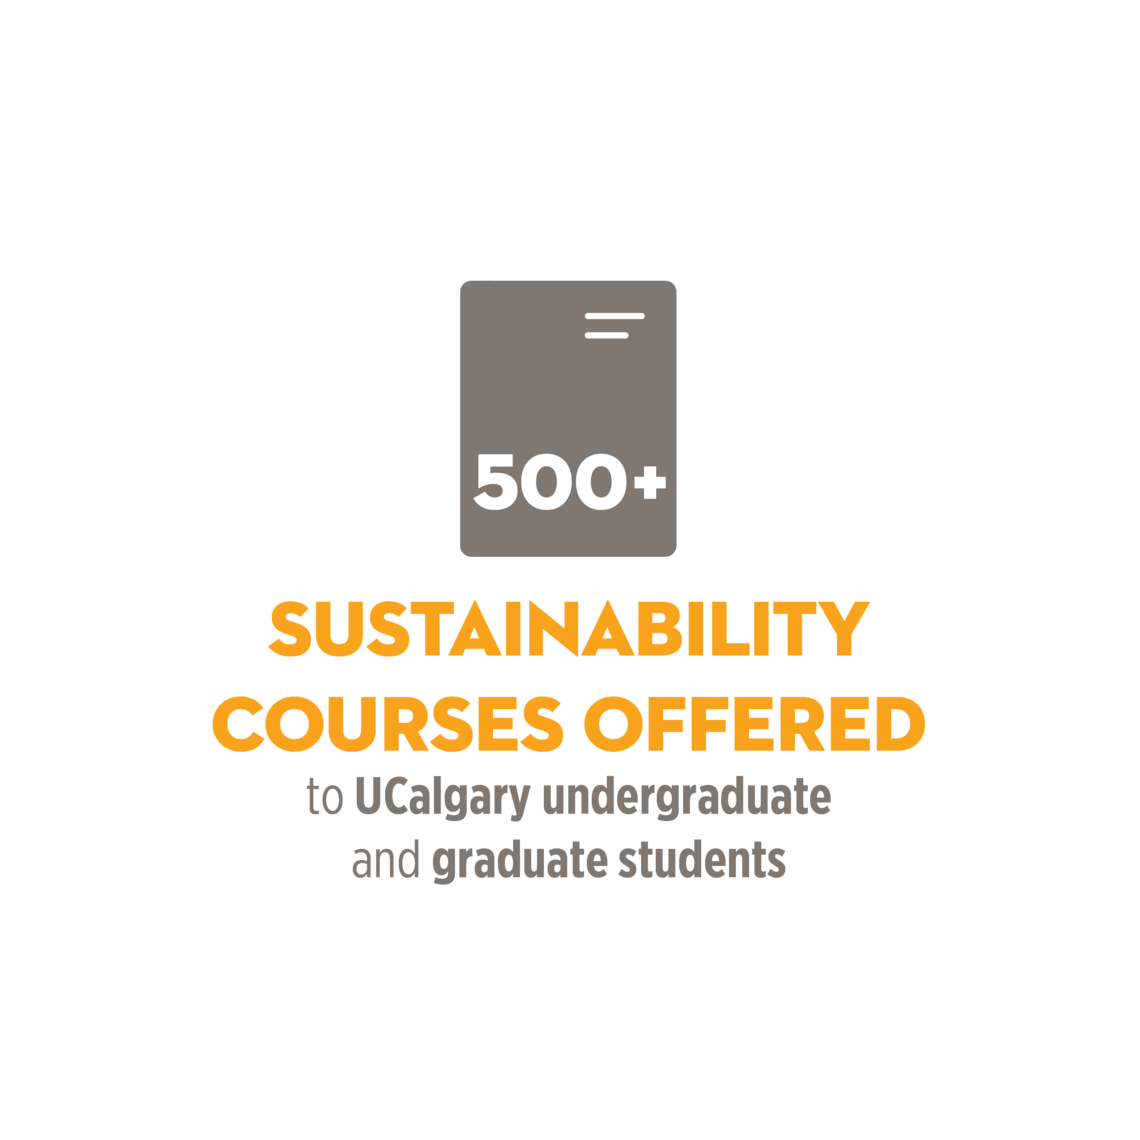 Sustainability courses offered